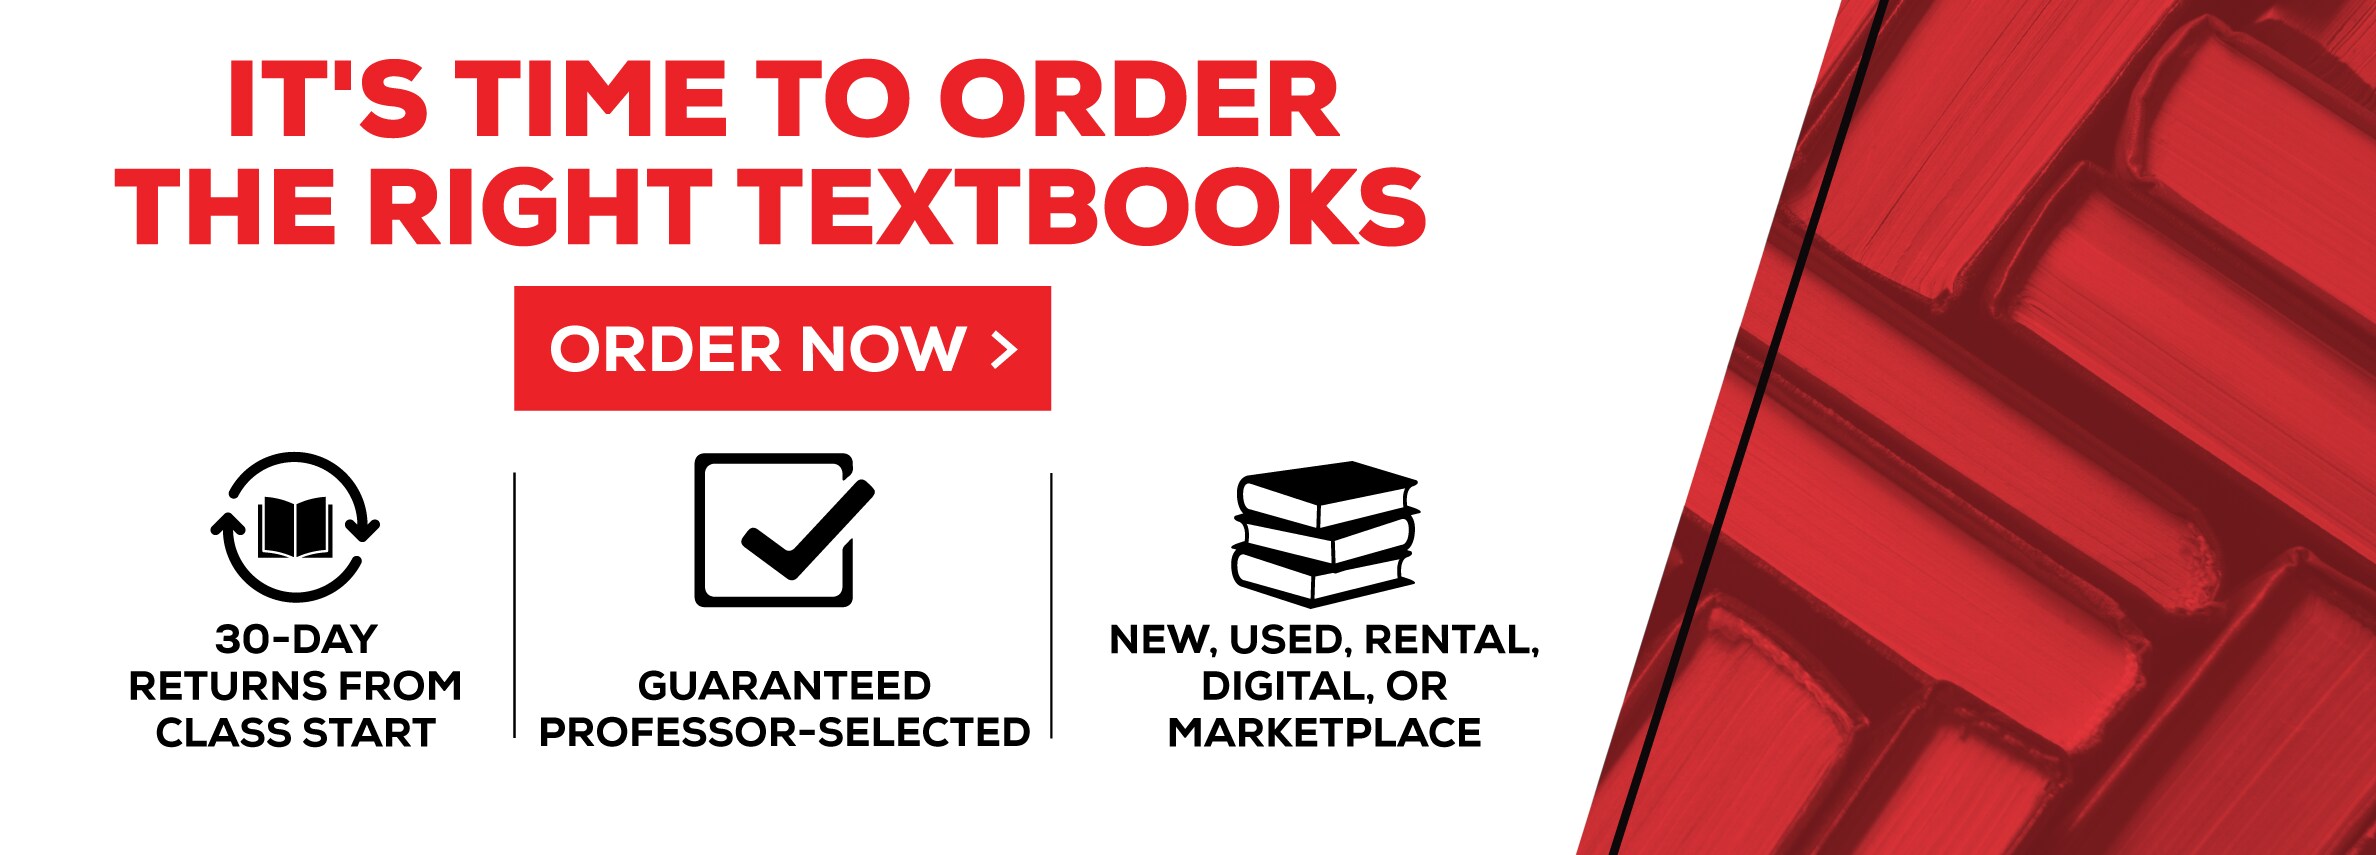 It's time to order the right textbooks. Order now. 30-day returns from class start. Guaranteed professor-selected. New, Used, rental, digital, or marketplace. (new tab)